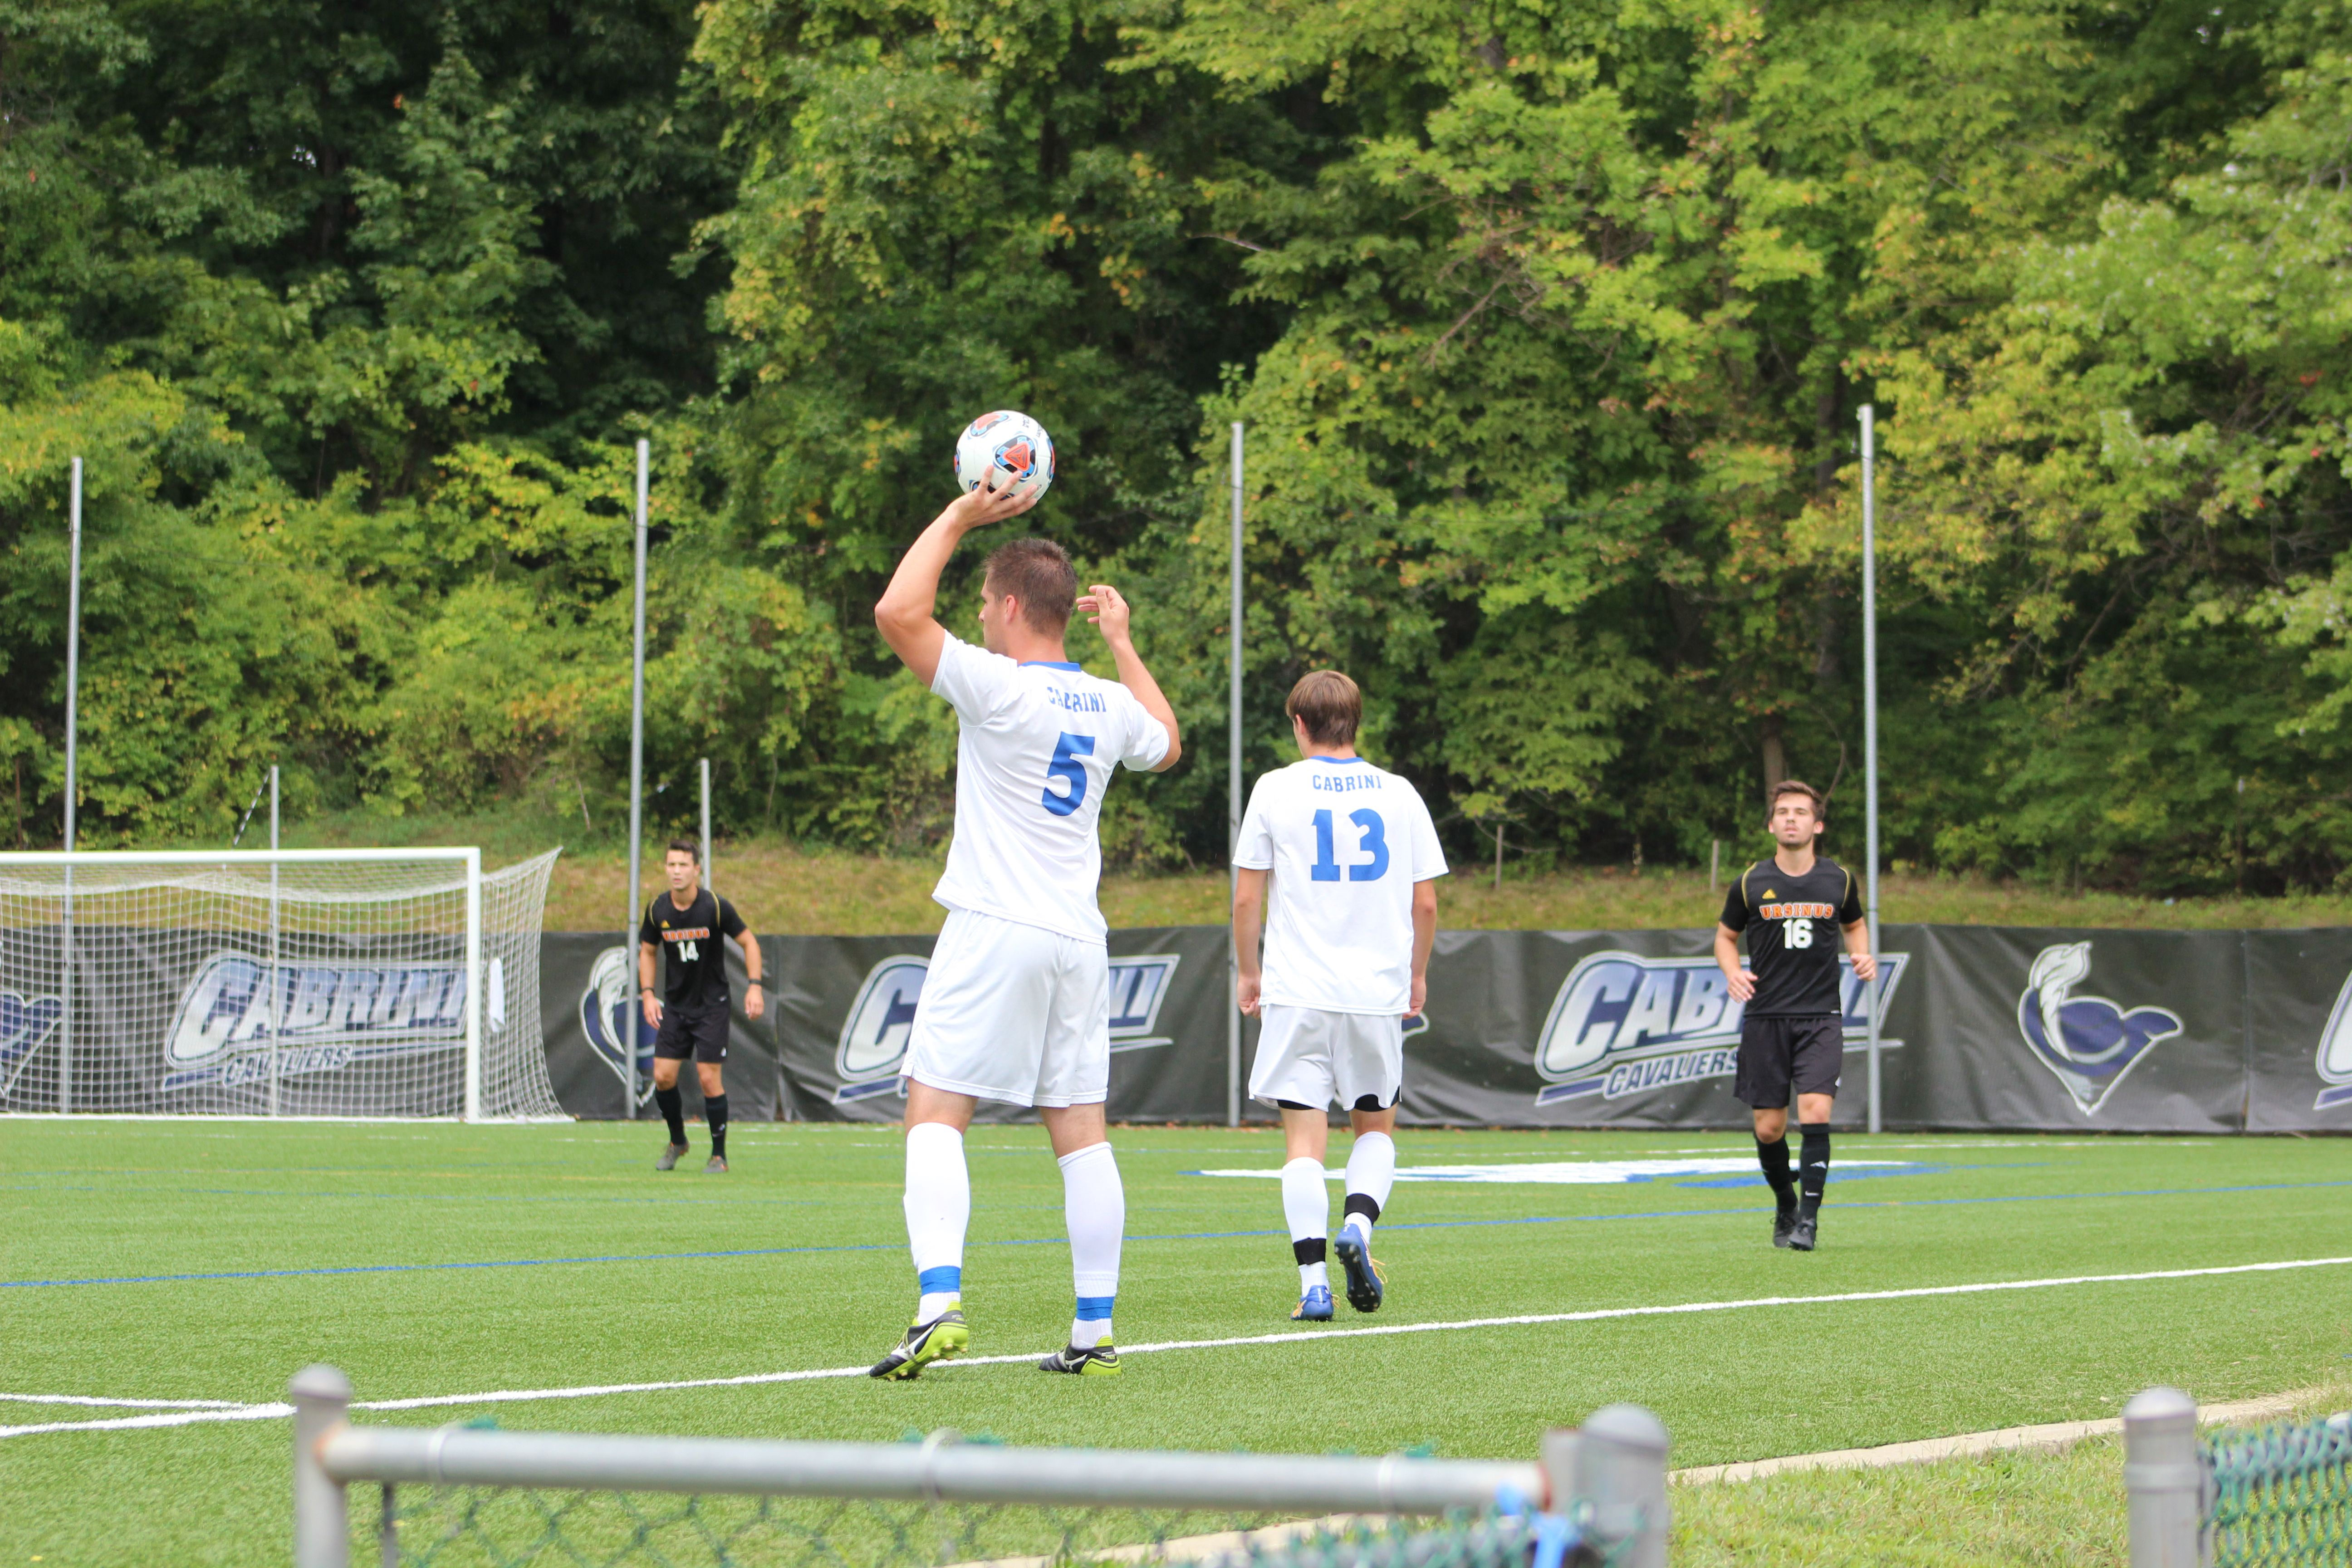 Cabrini men's soccer player John Underwood taking a throw in. (Photo by Jordan Clouthier / Photo for Pub)